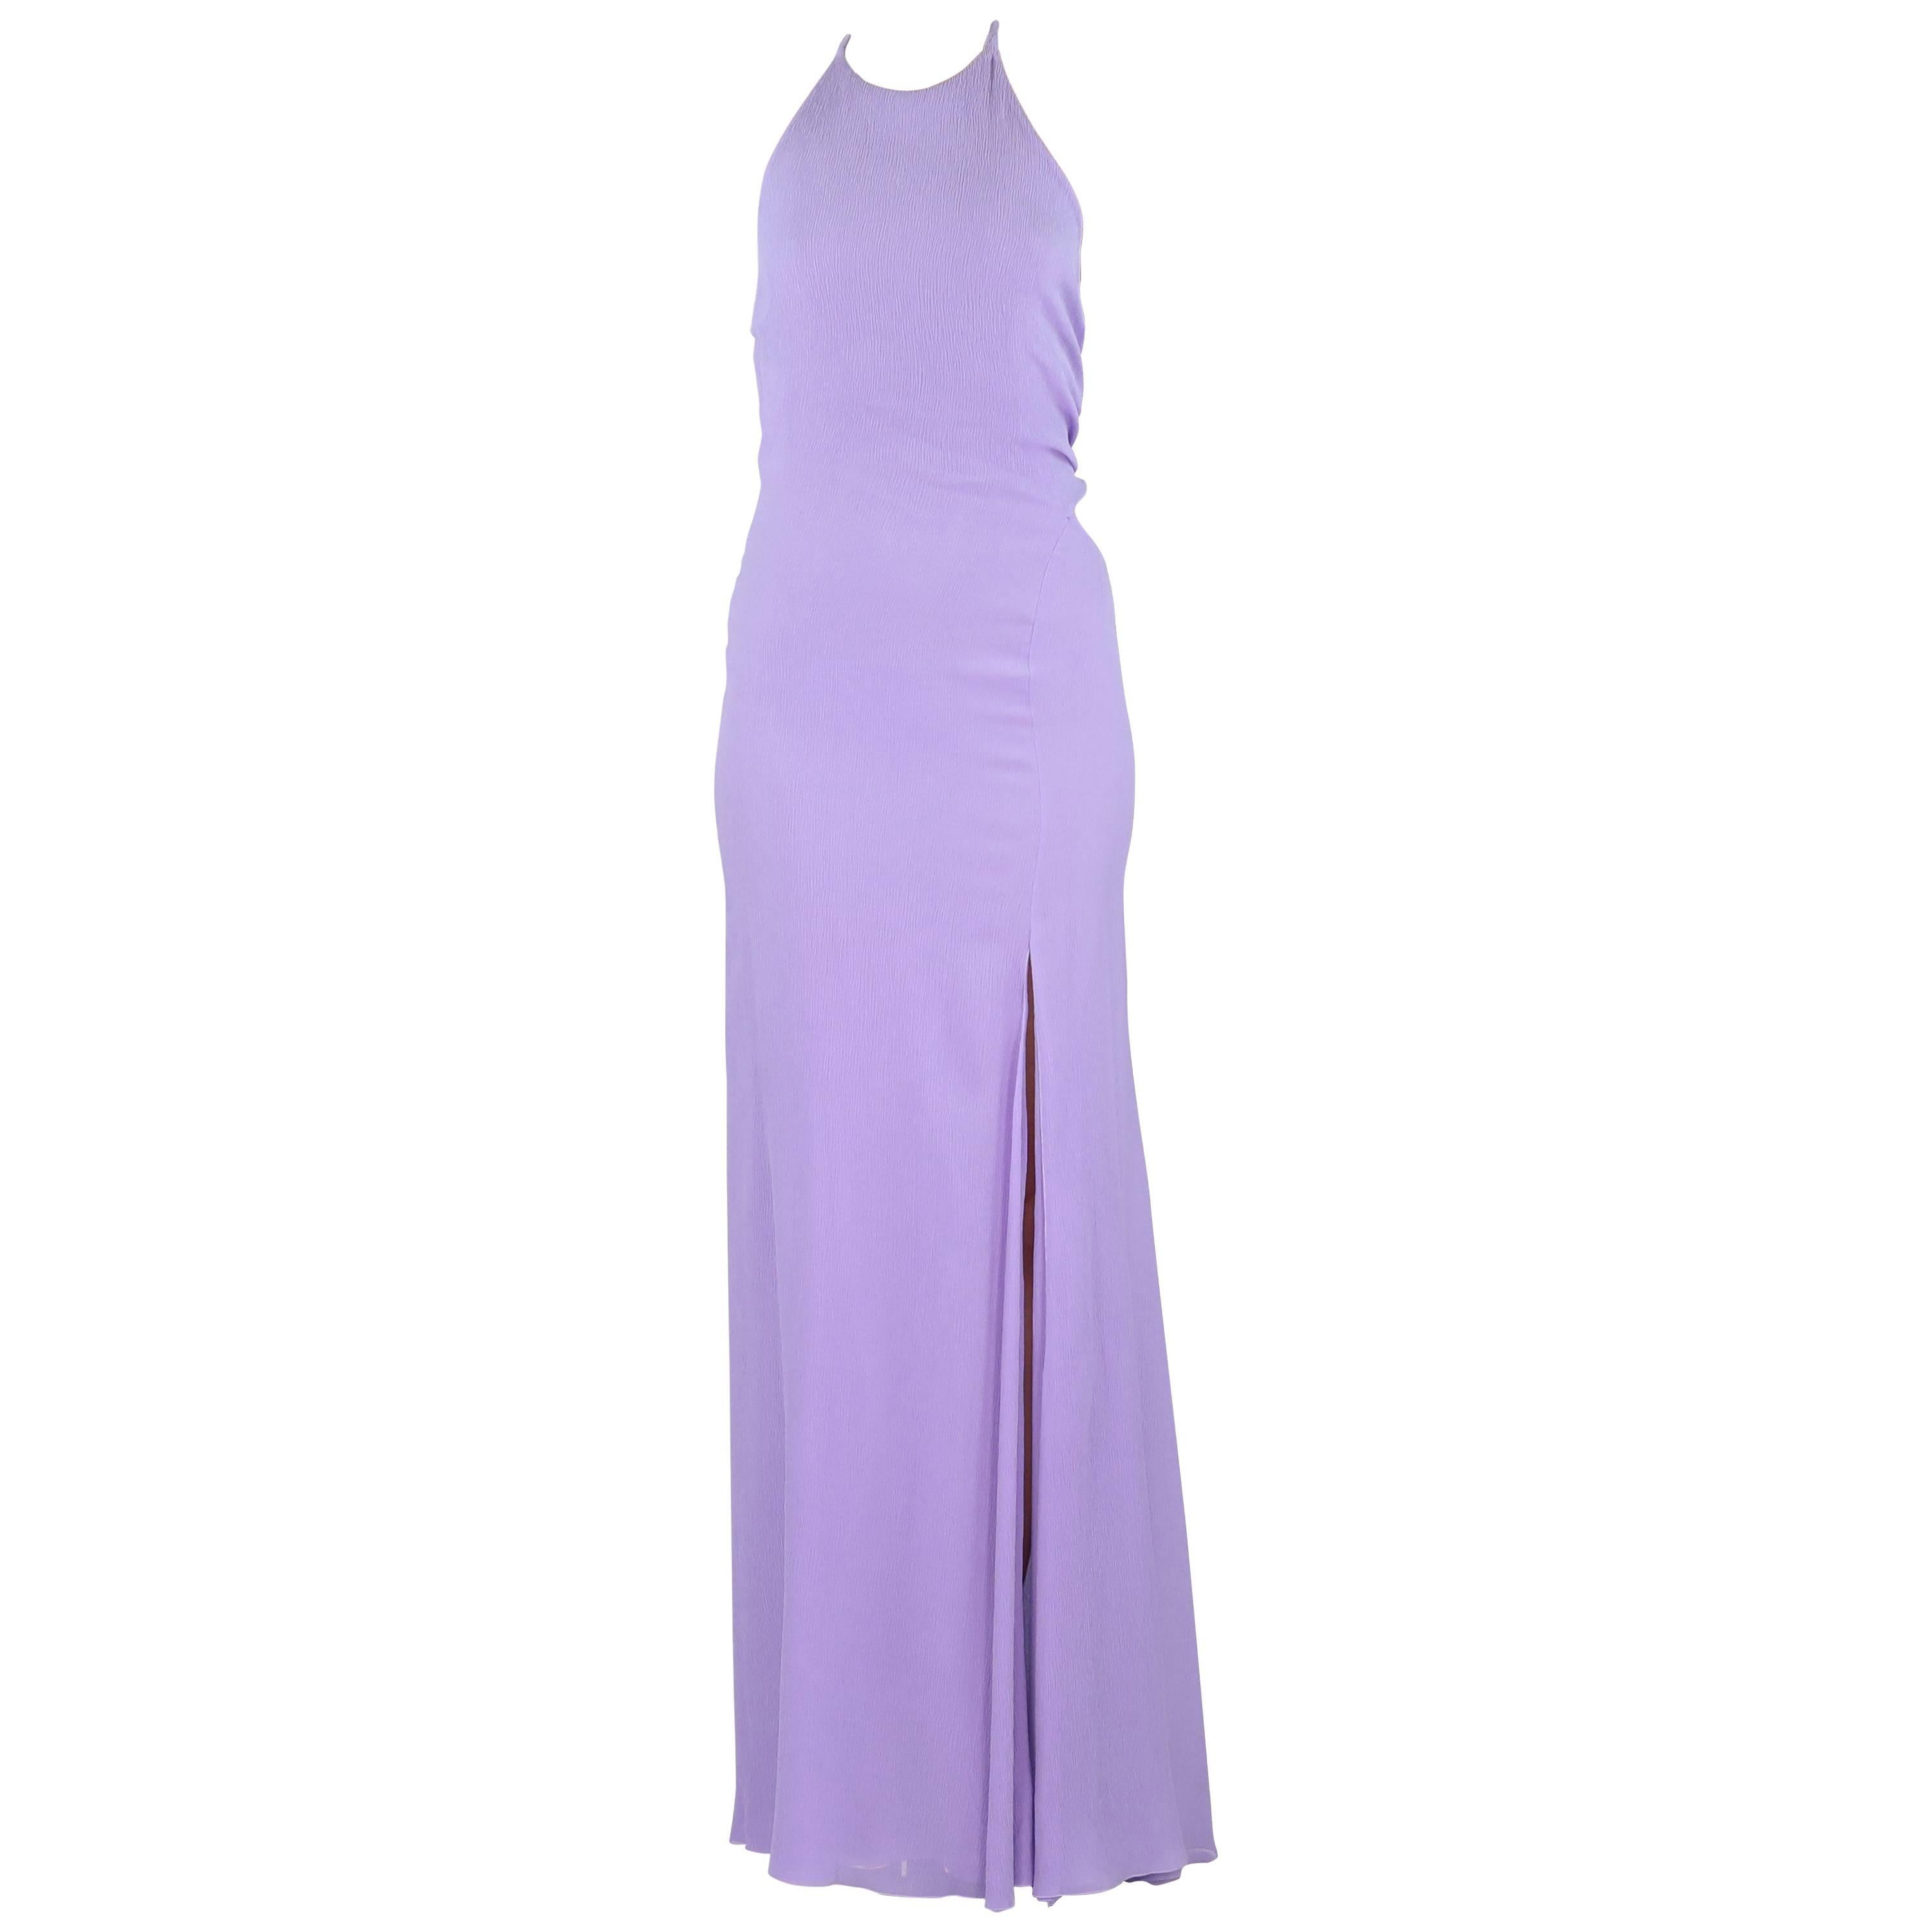 VINTAGE GIANNI VERSACE COUTURE OPEN BACK LILAC SILK DRESS Size 42 - 6